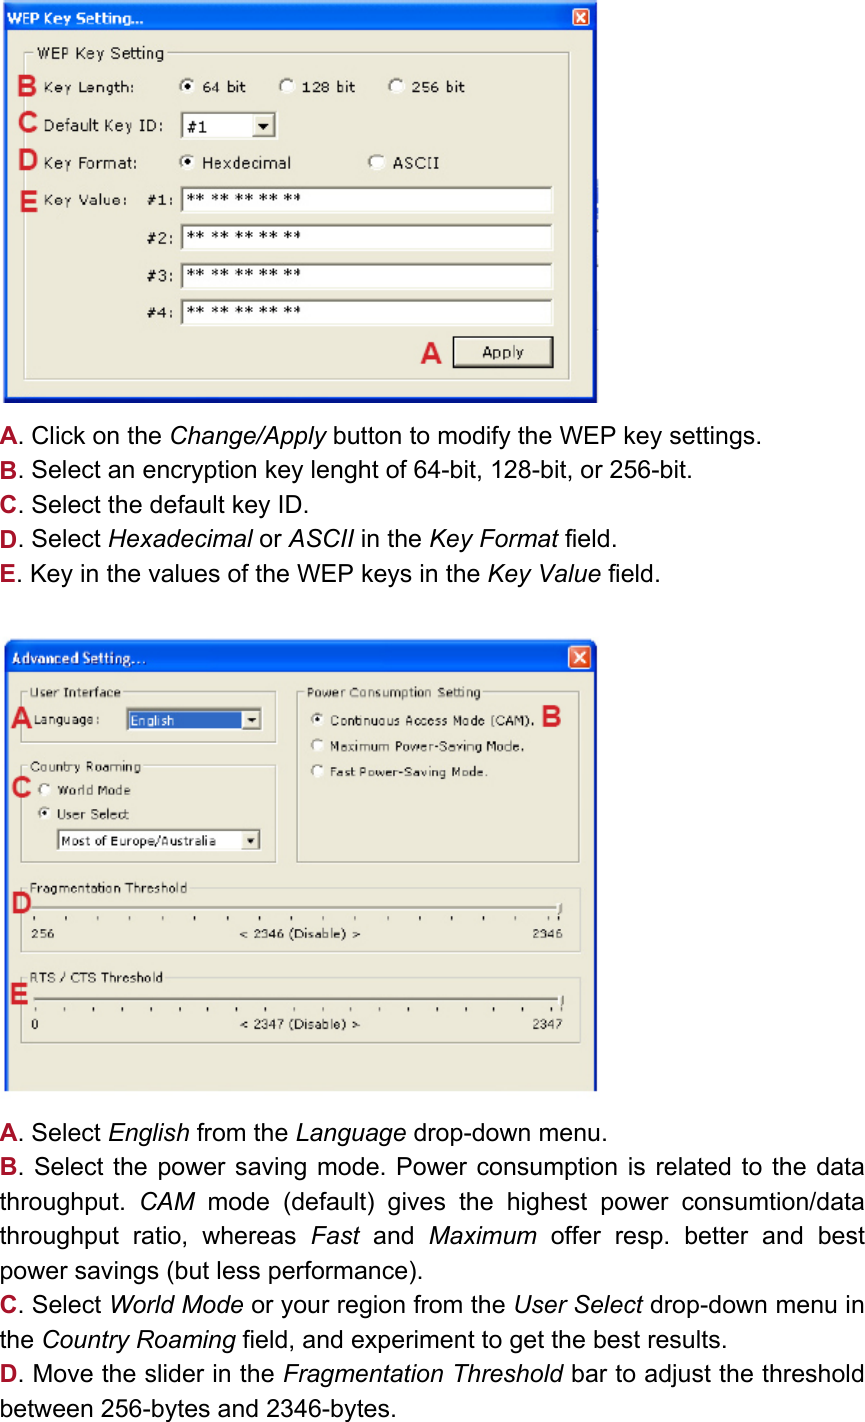   A. Click on the Change/Apply button to modify the WEP key settings. B. Select an encryption key lenght of 64-bit, 128-bit, or 256-bit. C. Select the default key ID. D. Select Hexadecimal or ASCII in the Key Format field. E. Key in the values of the WEP keys in the Key Value field.     A. Select English from the Language drop-down menu. B. Select the power saving mode. Power consumption is related to the data throughput.  CAM mode (default) gives the highest power consumtion/data throughput ratio, whereas Fast and Maximum offer resp. better and best power savings (but less performance). C. Select World Mode or your region from the User Select drop-down menu in the Country Roaming field, and experiment to get the best results.  D. Move the slider in the Fragmentation Threshold bar to adjust the threshold between 256-bytes and 2346-bytes. 